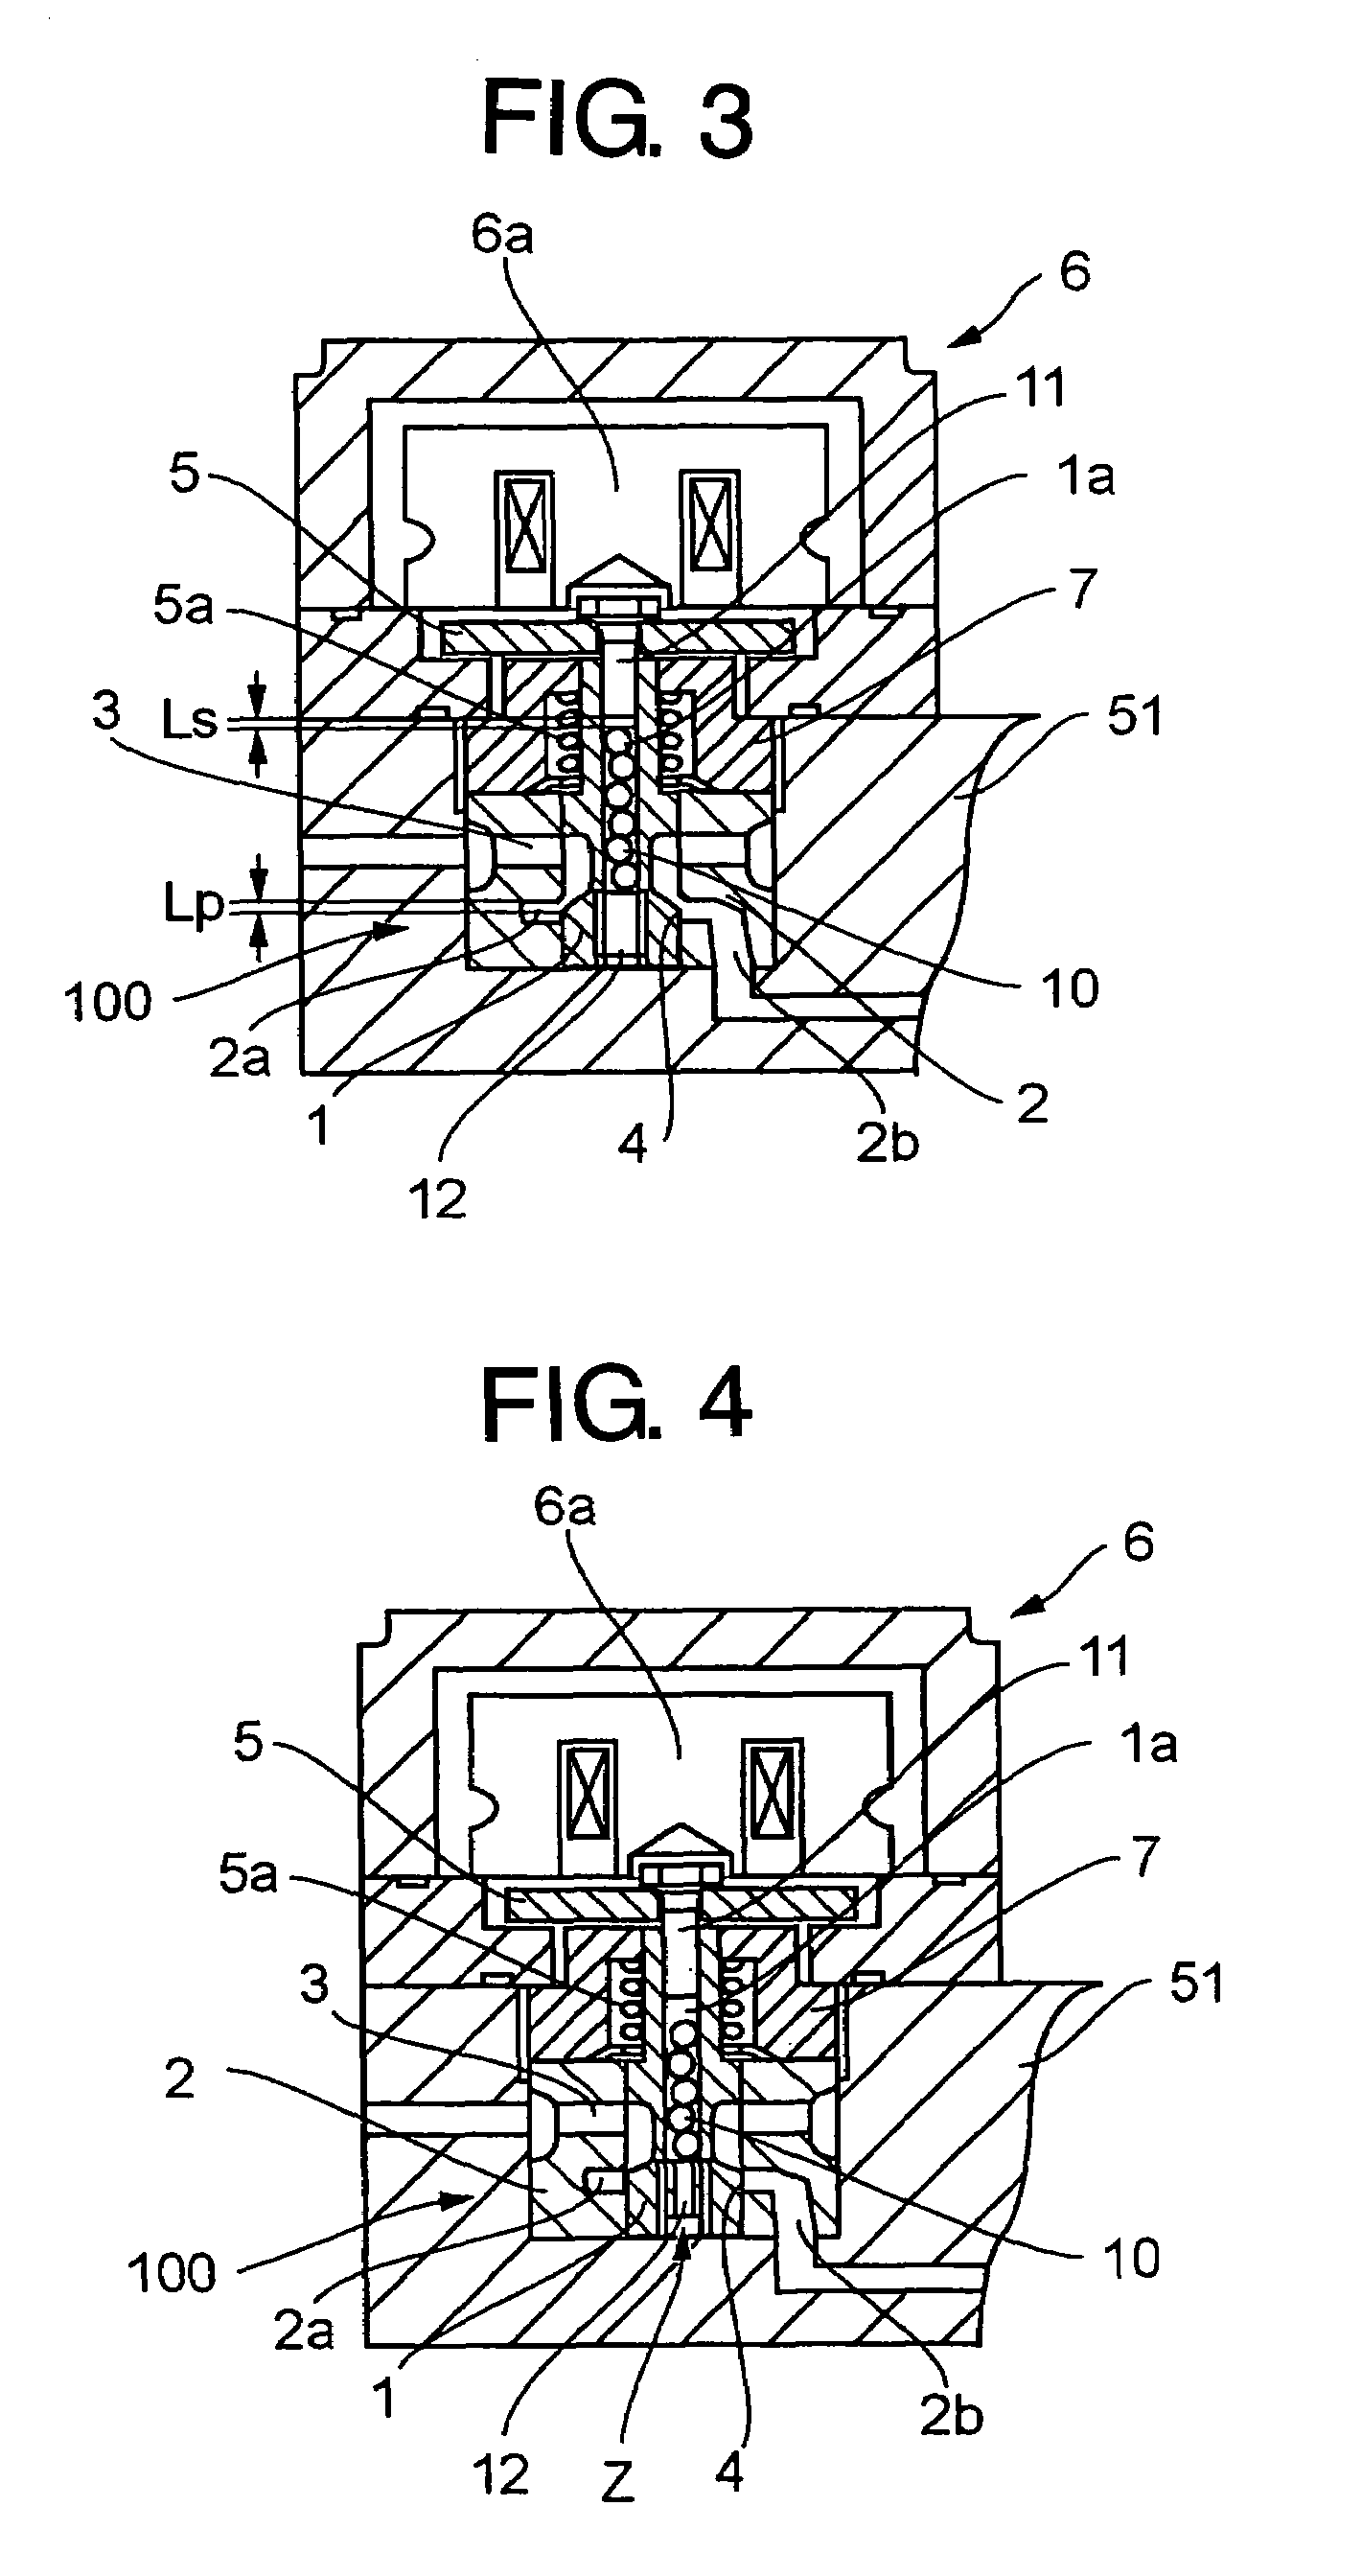 Electromagnetic controlled fuel injection apparatus with poppet valve